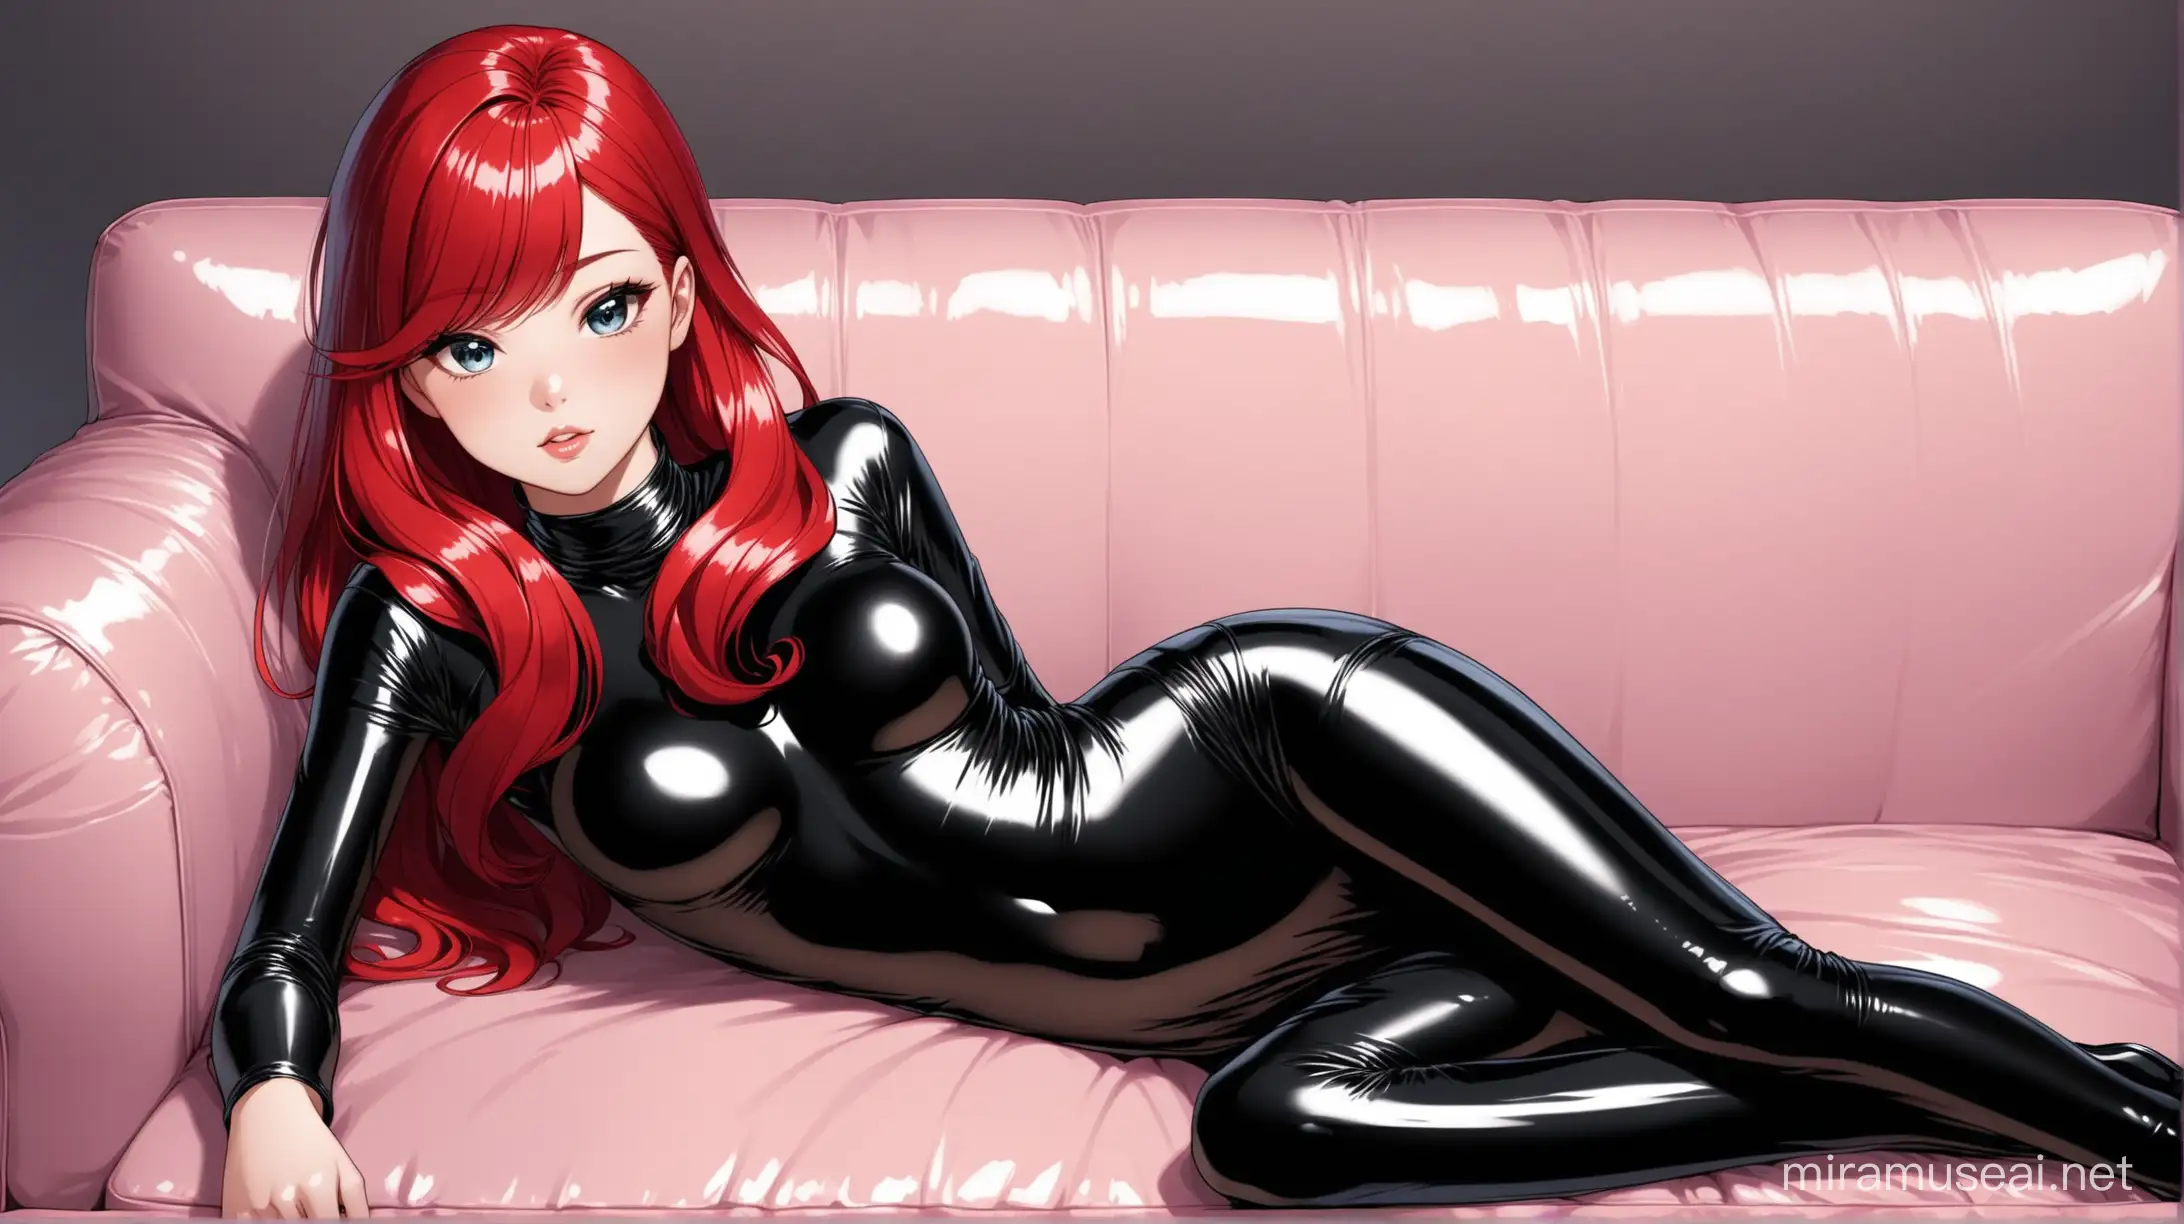 Arielinspired Model in Black Latex Dress Lounging on Sofa